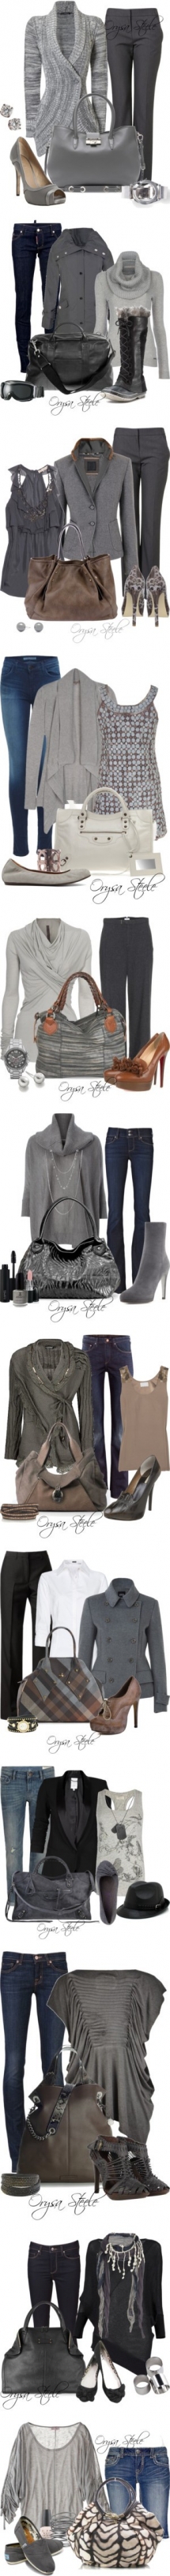 Shades of Grey - My Style